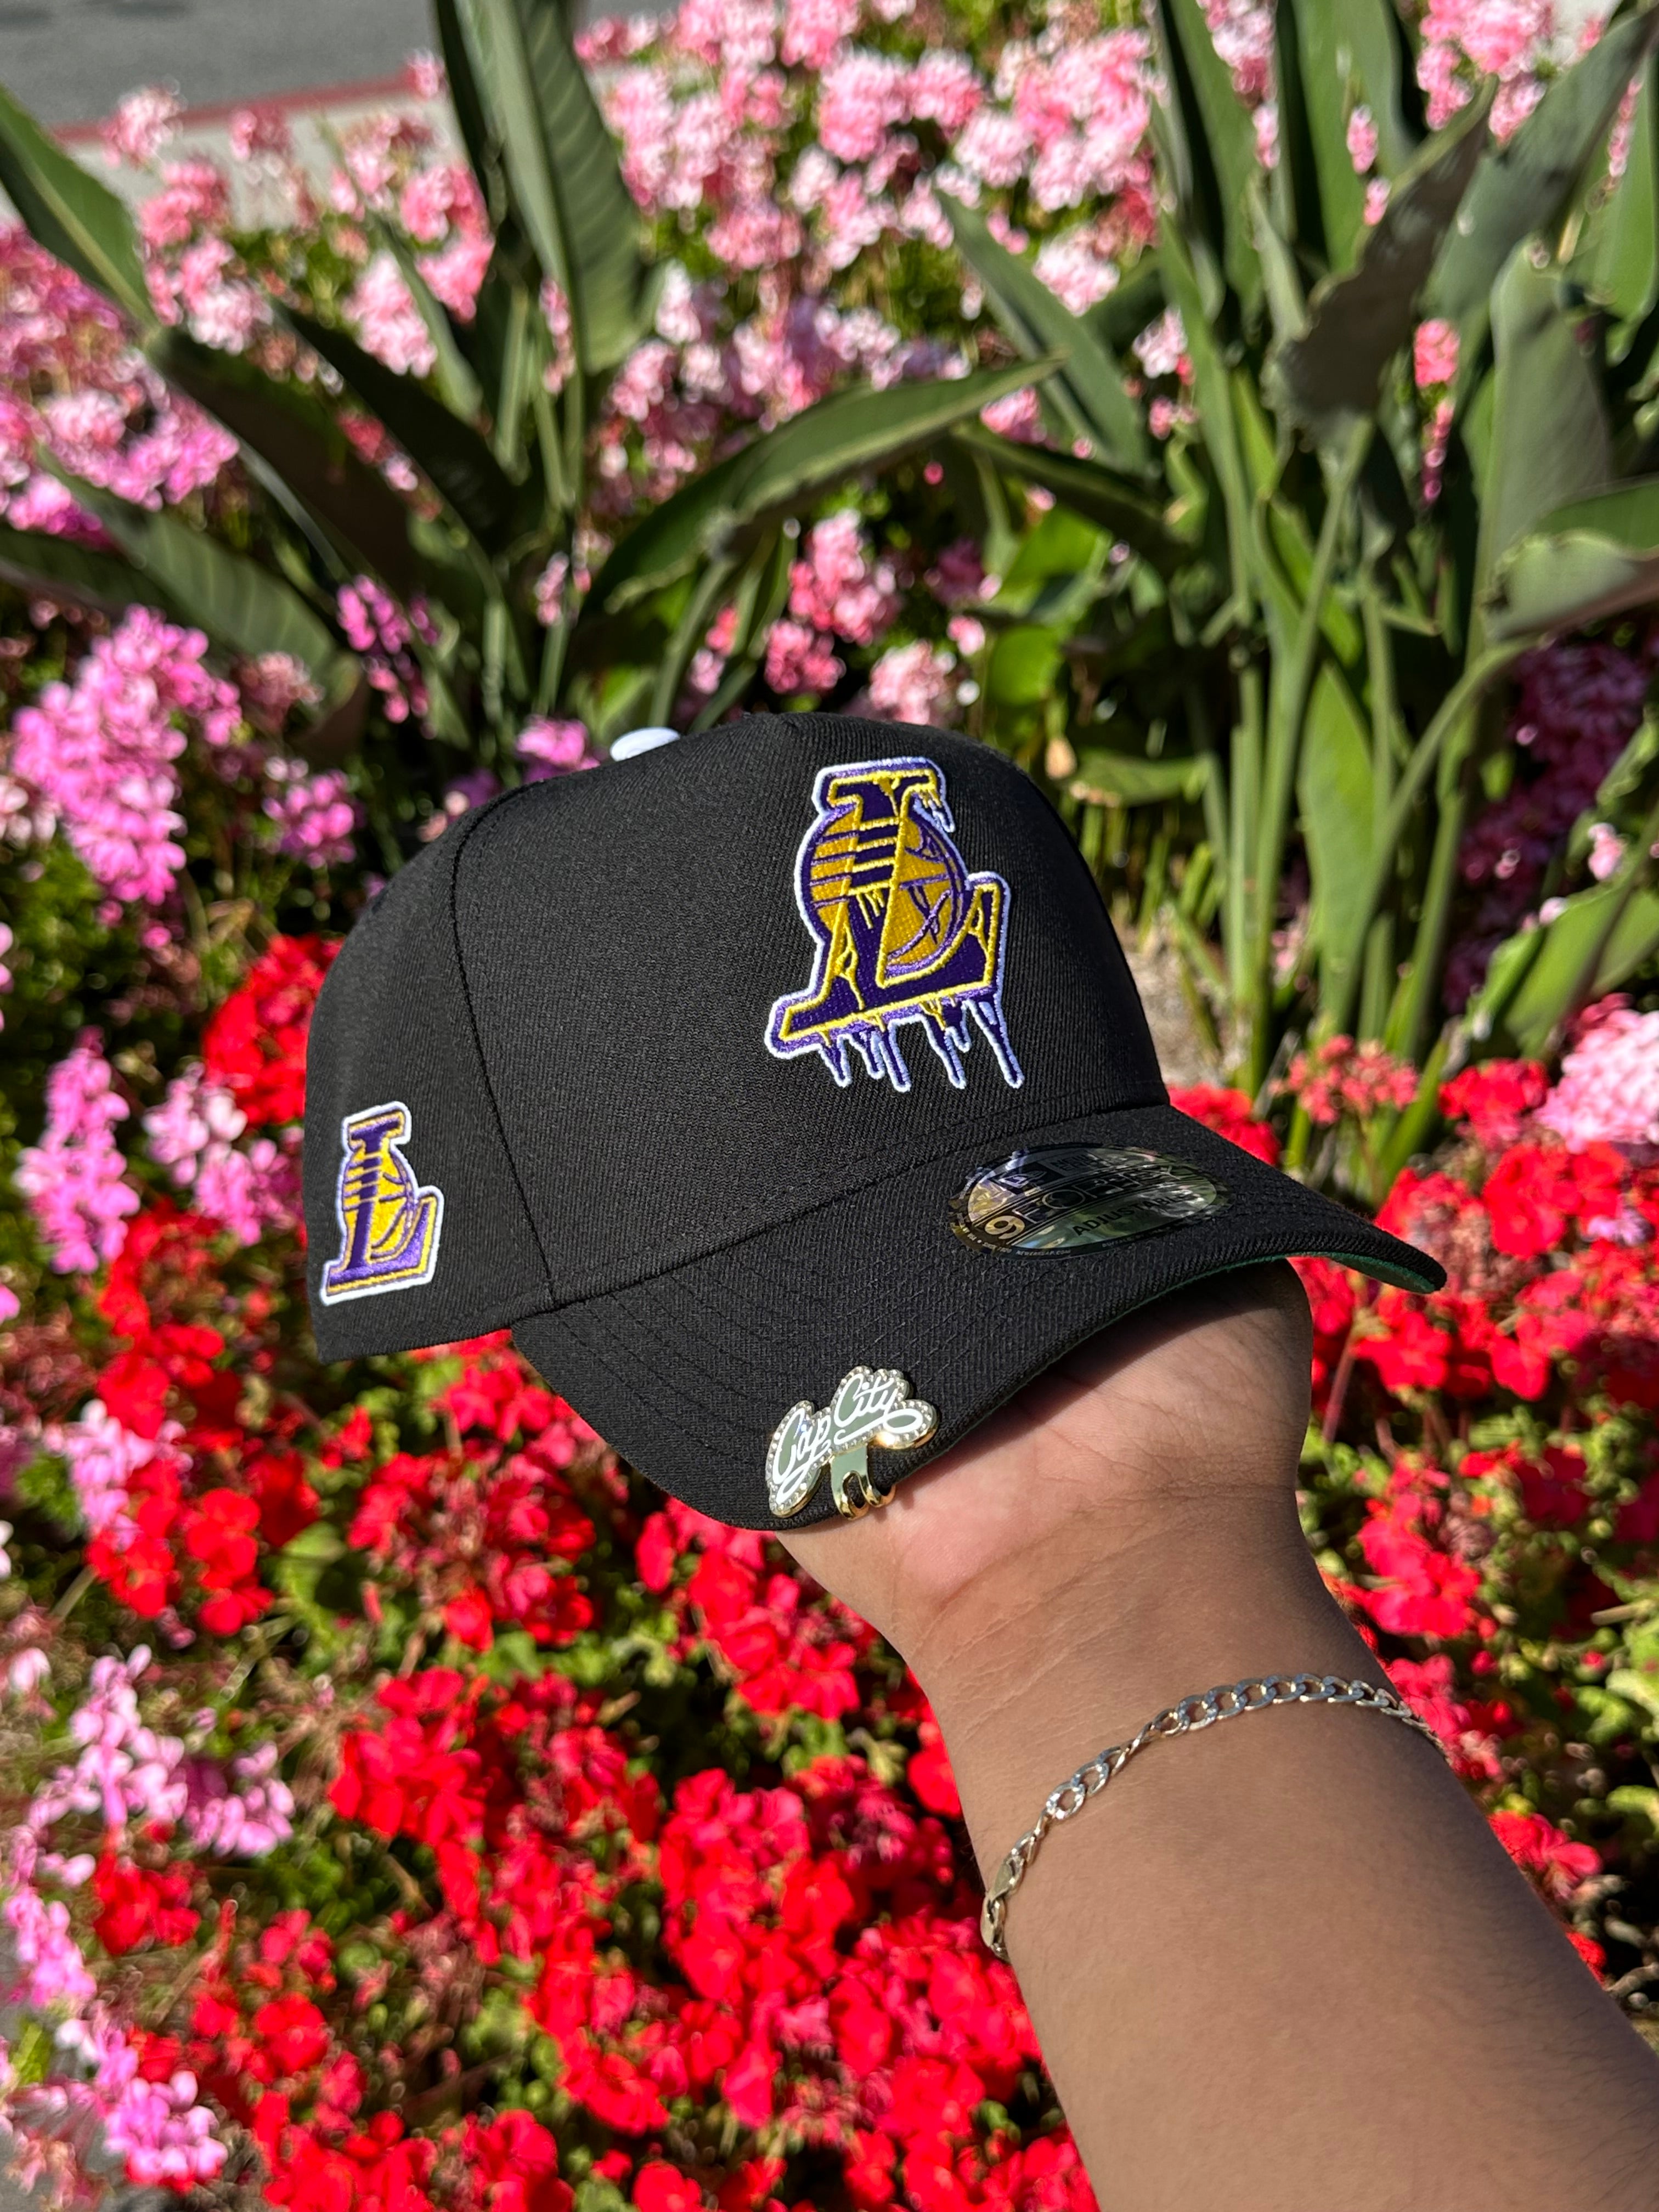 NEW ERA EXCLUSIVE 9FORTY A-FRAME BLACK LOS ANGELES LAKERS DRIP LOGO W/ LAKERS LOGO SIDE PATCH